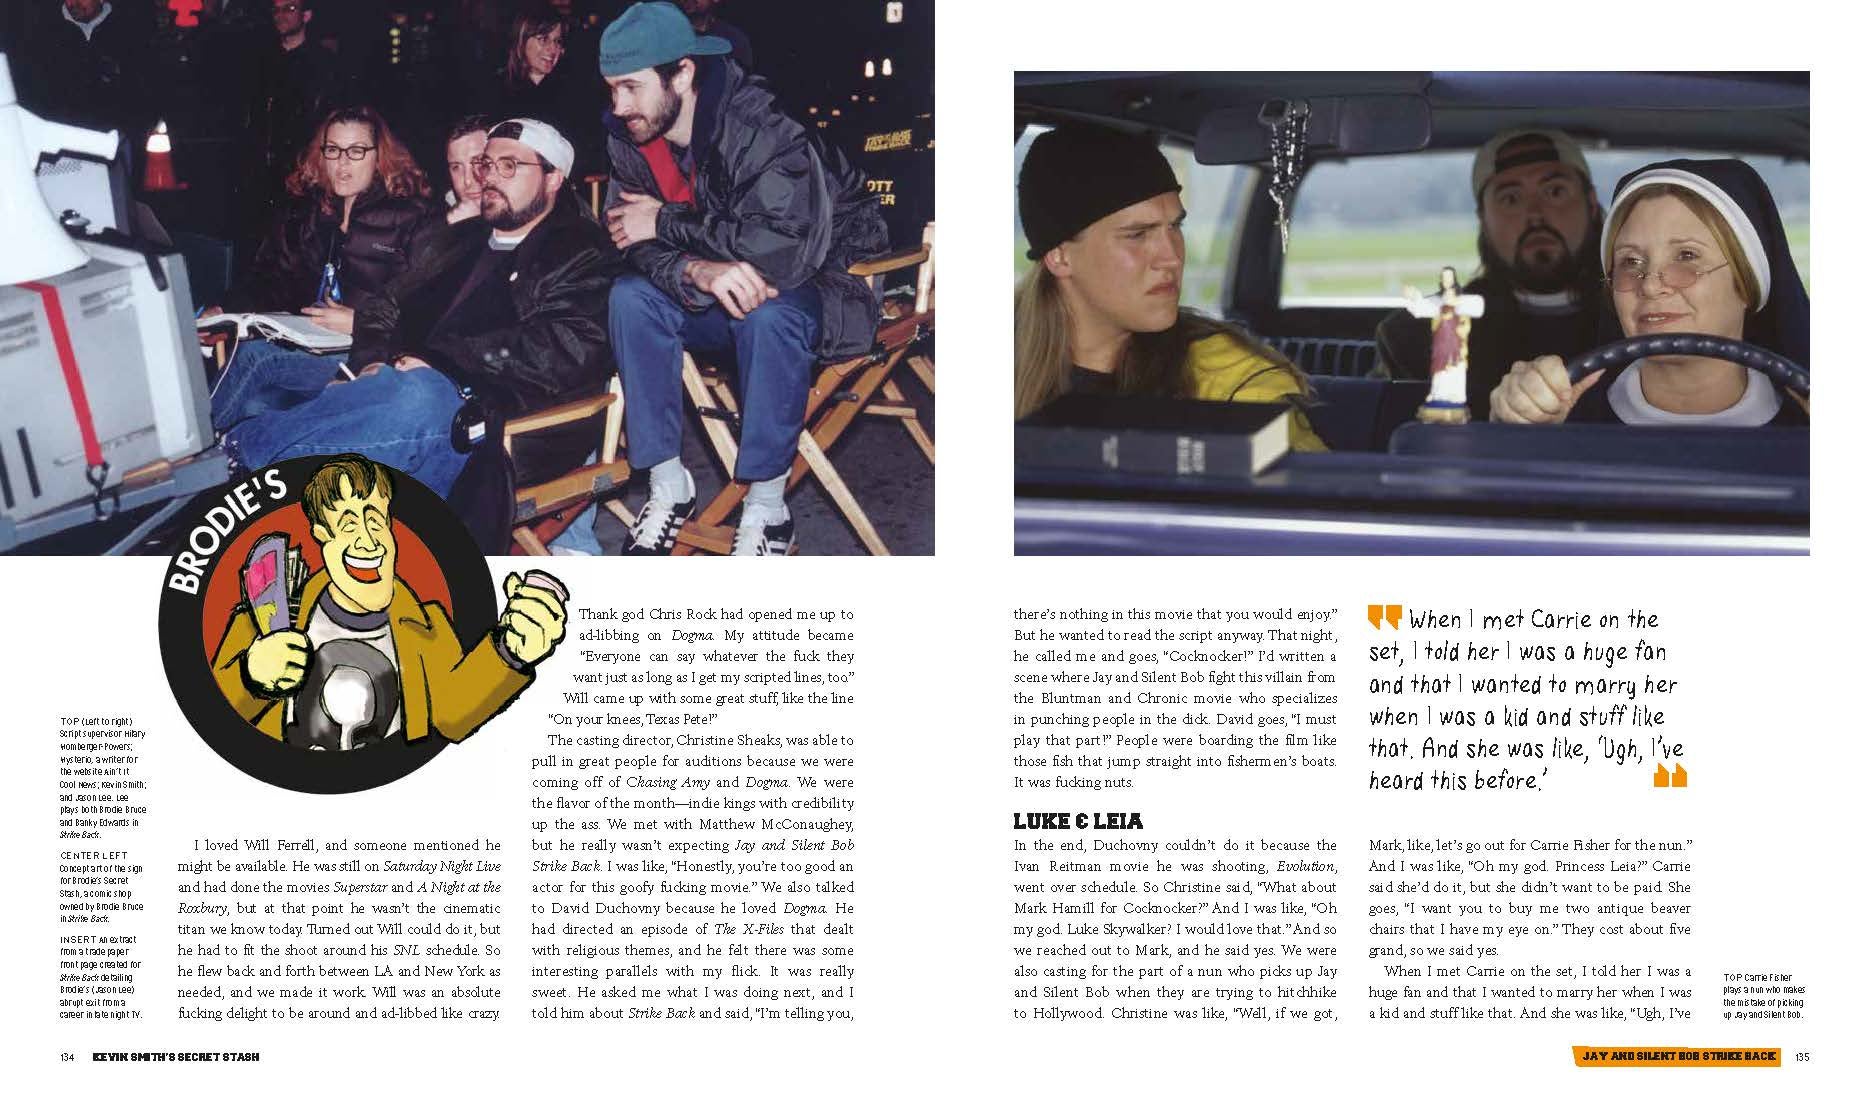 A few pages on Jay and Silent Bob Strike Back. (Image: Insight Editions)